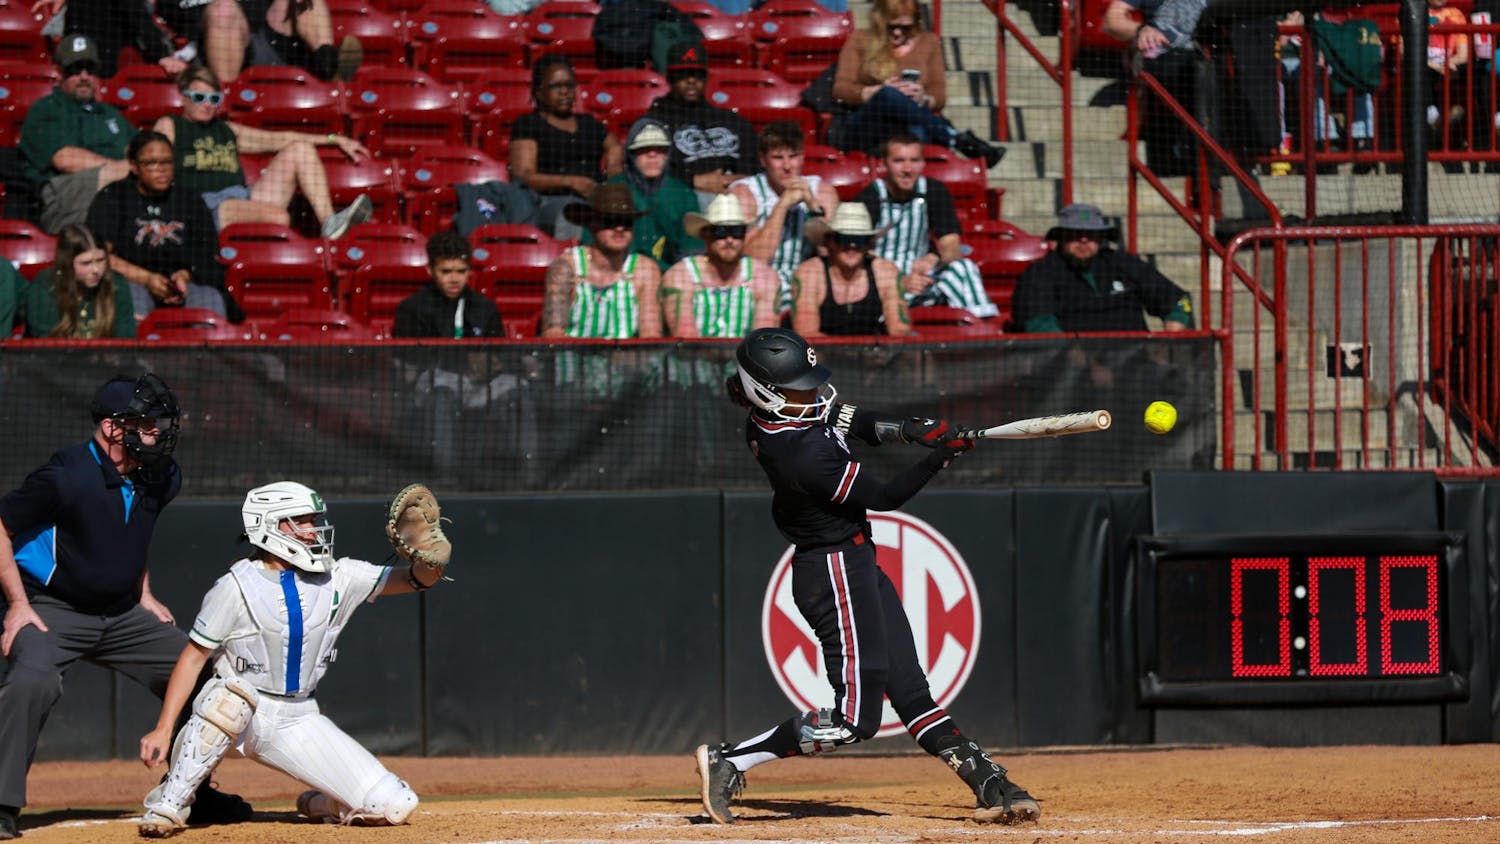 Senior infielder Denver Bryant swings at a pitch during South Carolina's matchup against UNC Charlotte at Beckham Field on Feb. 25, 2024. Bryant scored one run in the Gamecocks’ 7-2 victory.